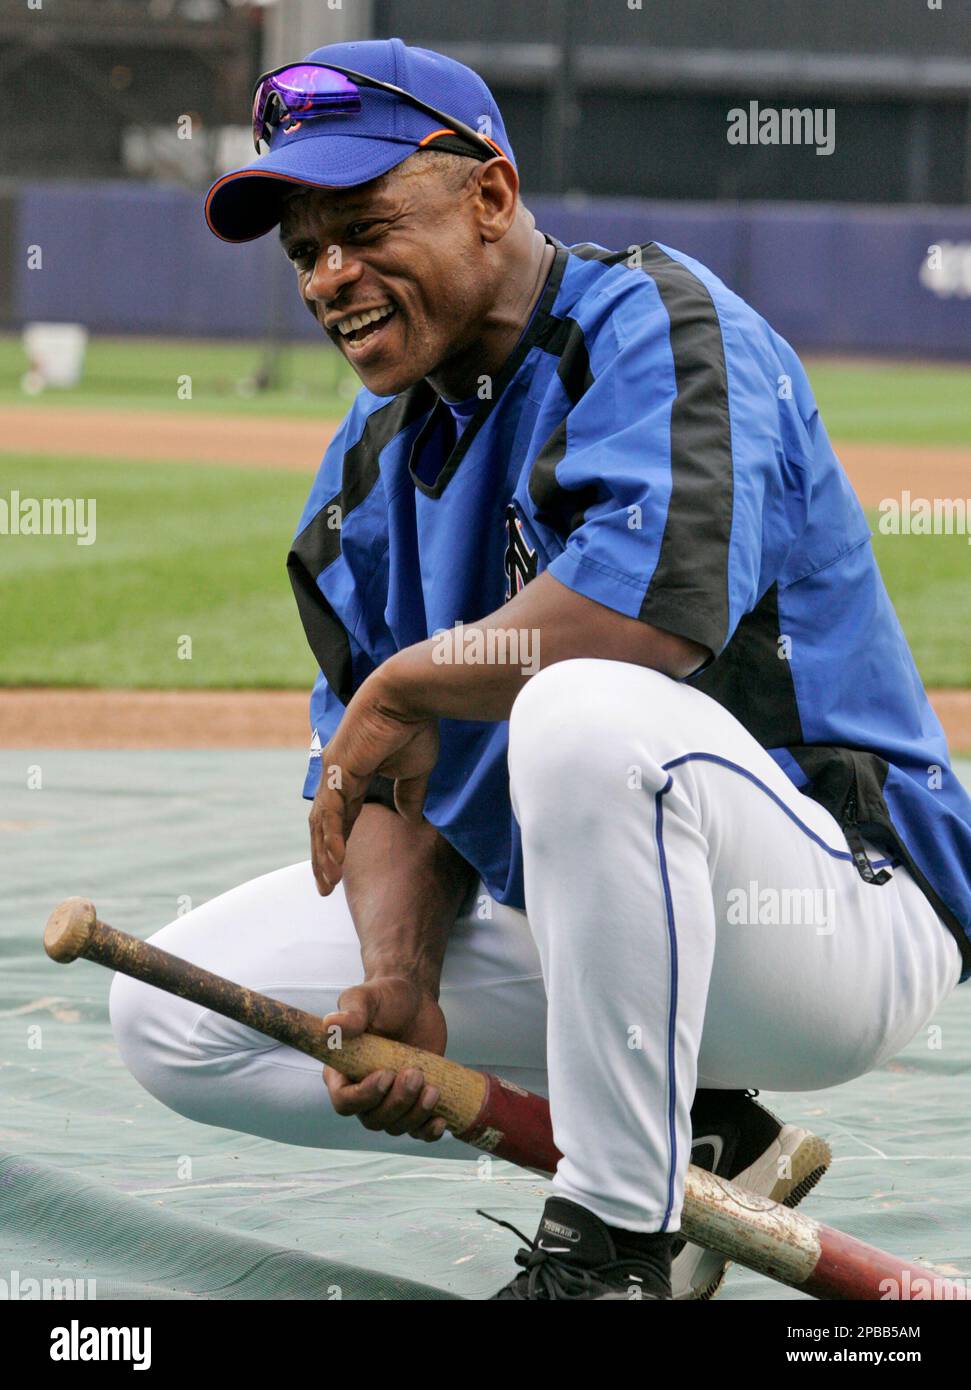 New York mets new first base coach Rickey Henderson talks with players  Shawn Green and Carlos Delgado during batting practice before the Mets play  the Cincinnati Reds in a baseball game, Friday